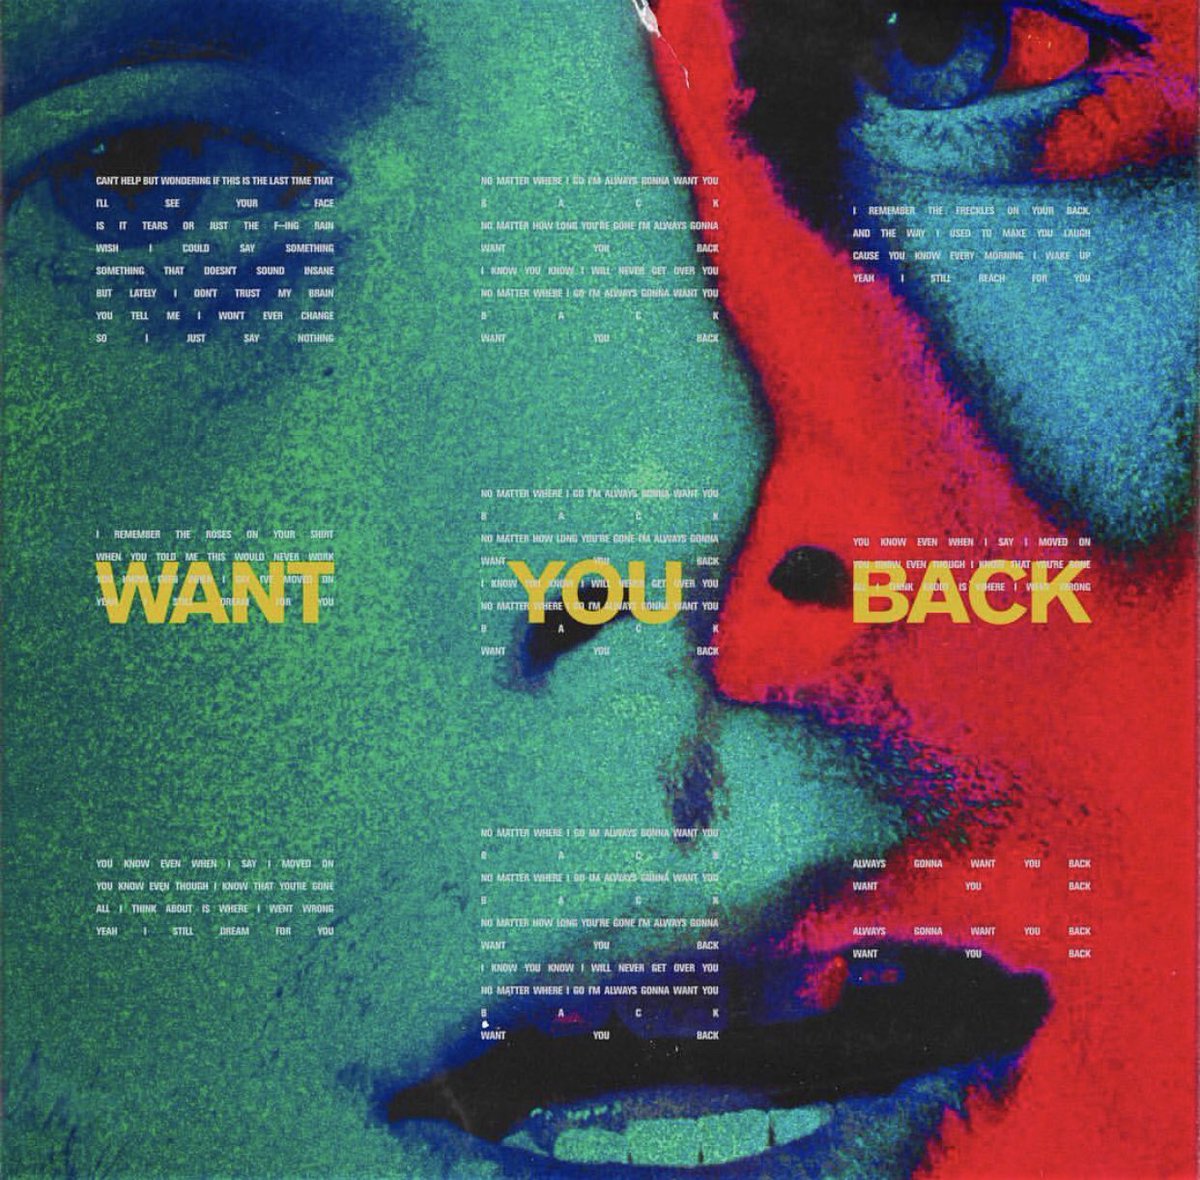 In honor of  #StreamWantYouBack, here’s a throwback thread to when 5sos first announced Want You Back back in 2018. This gives me so much nostalgia, as it’s the first era I experienced since joining the 5sosfam back in 2017 and 5sos first music after hiatus.